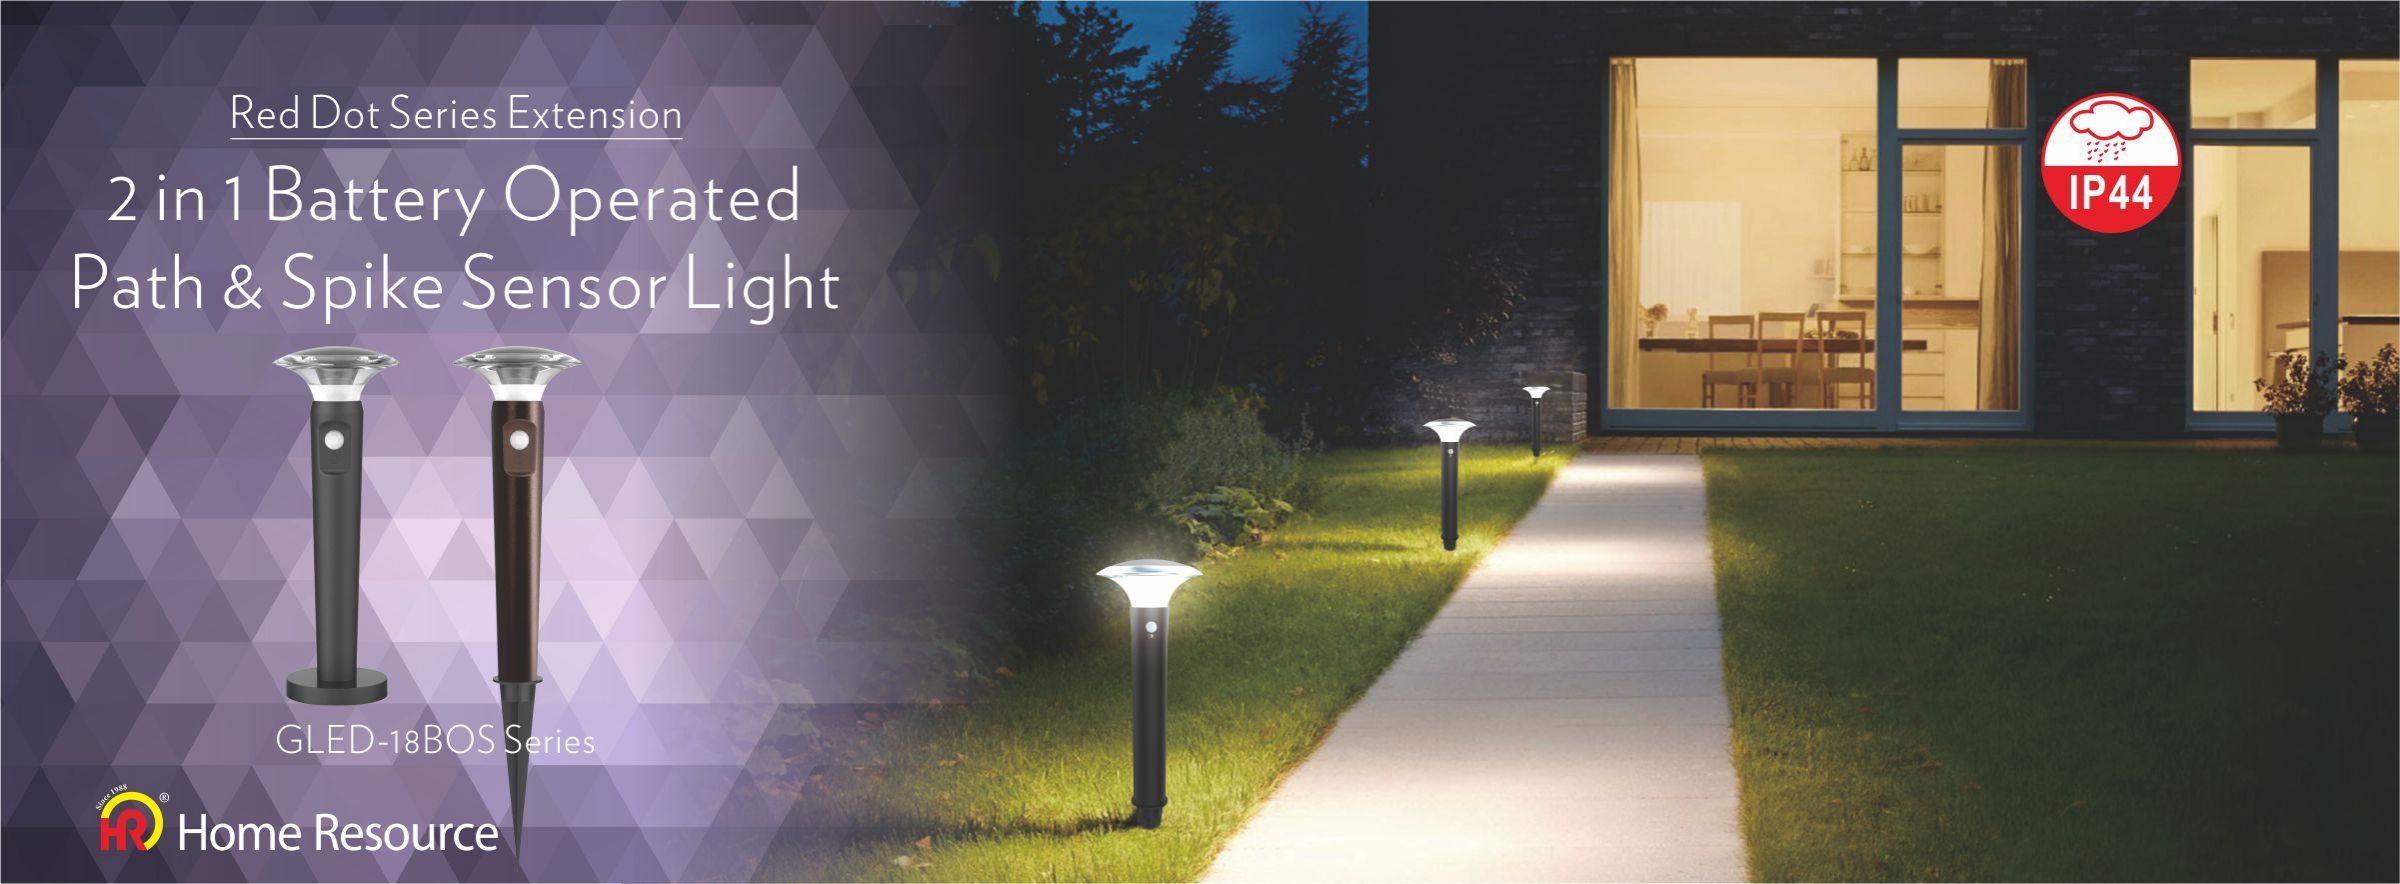 2 in 1 LED Battery Operated Pathway Light for any Outdoor Space